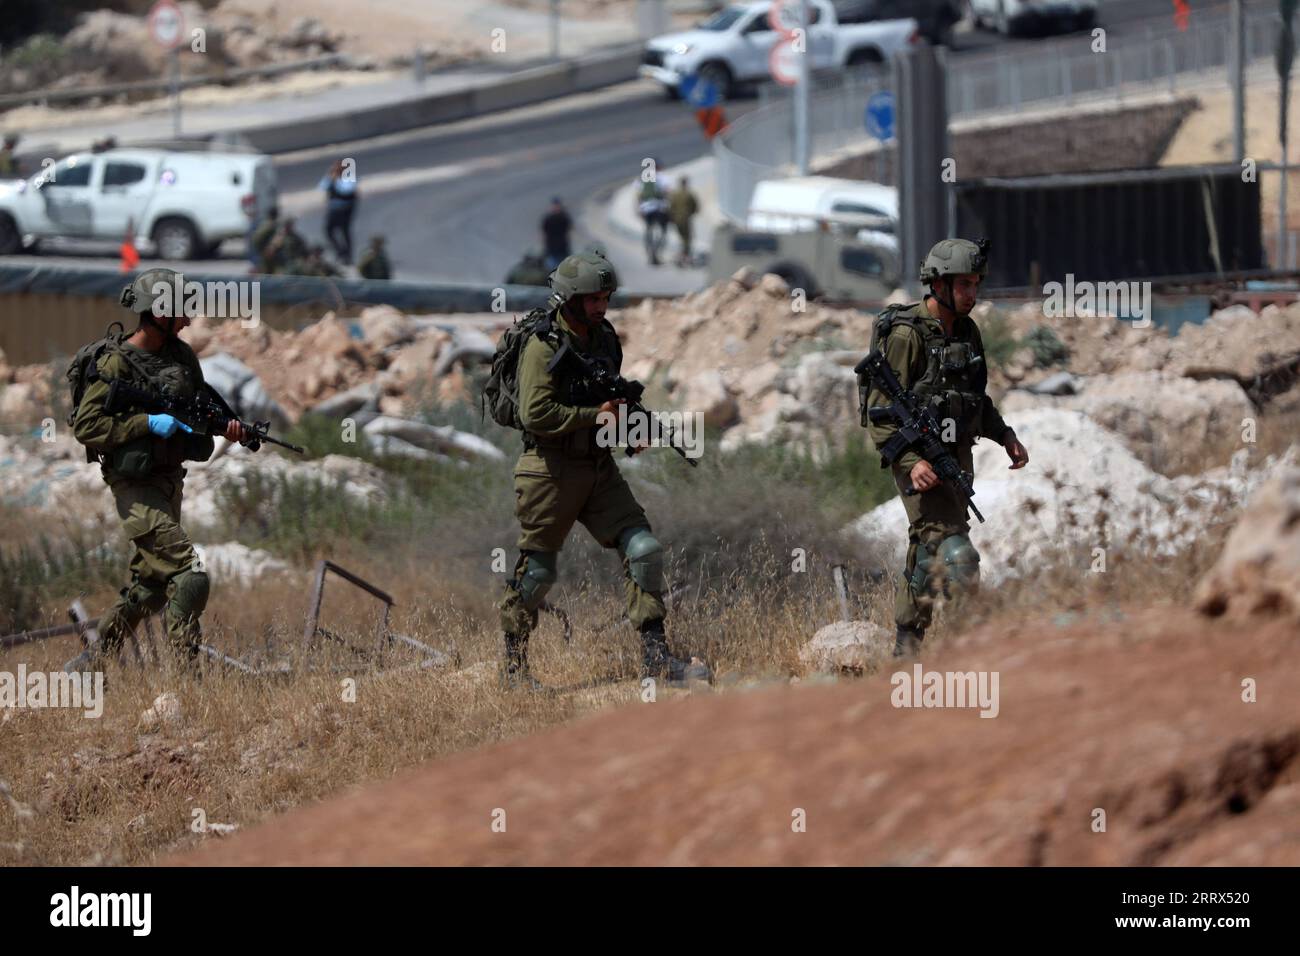 230821 -- HEBRON, Aug. 21, 2023 -- Members of Israeli forces are seen near the site of a reported attack outside the Jewish settlement of Beit Hagai, south of the West Bank city of Hebron, Aug. 21, 2023. An Israeli woman was killed, and a man was badly injured on Monday by a Palestinian gunman in a drive-by attack in the occupied West Bank, according to the Israeli military. Photo by /Xinhua MIDEAST-HEBRON-SHOOTING-ATTACK MamounxWazwaz PUBLICATIONxNOTxINxCHN Stock Photo